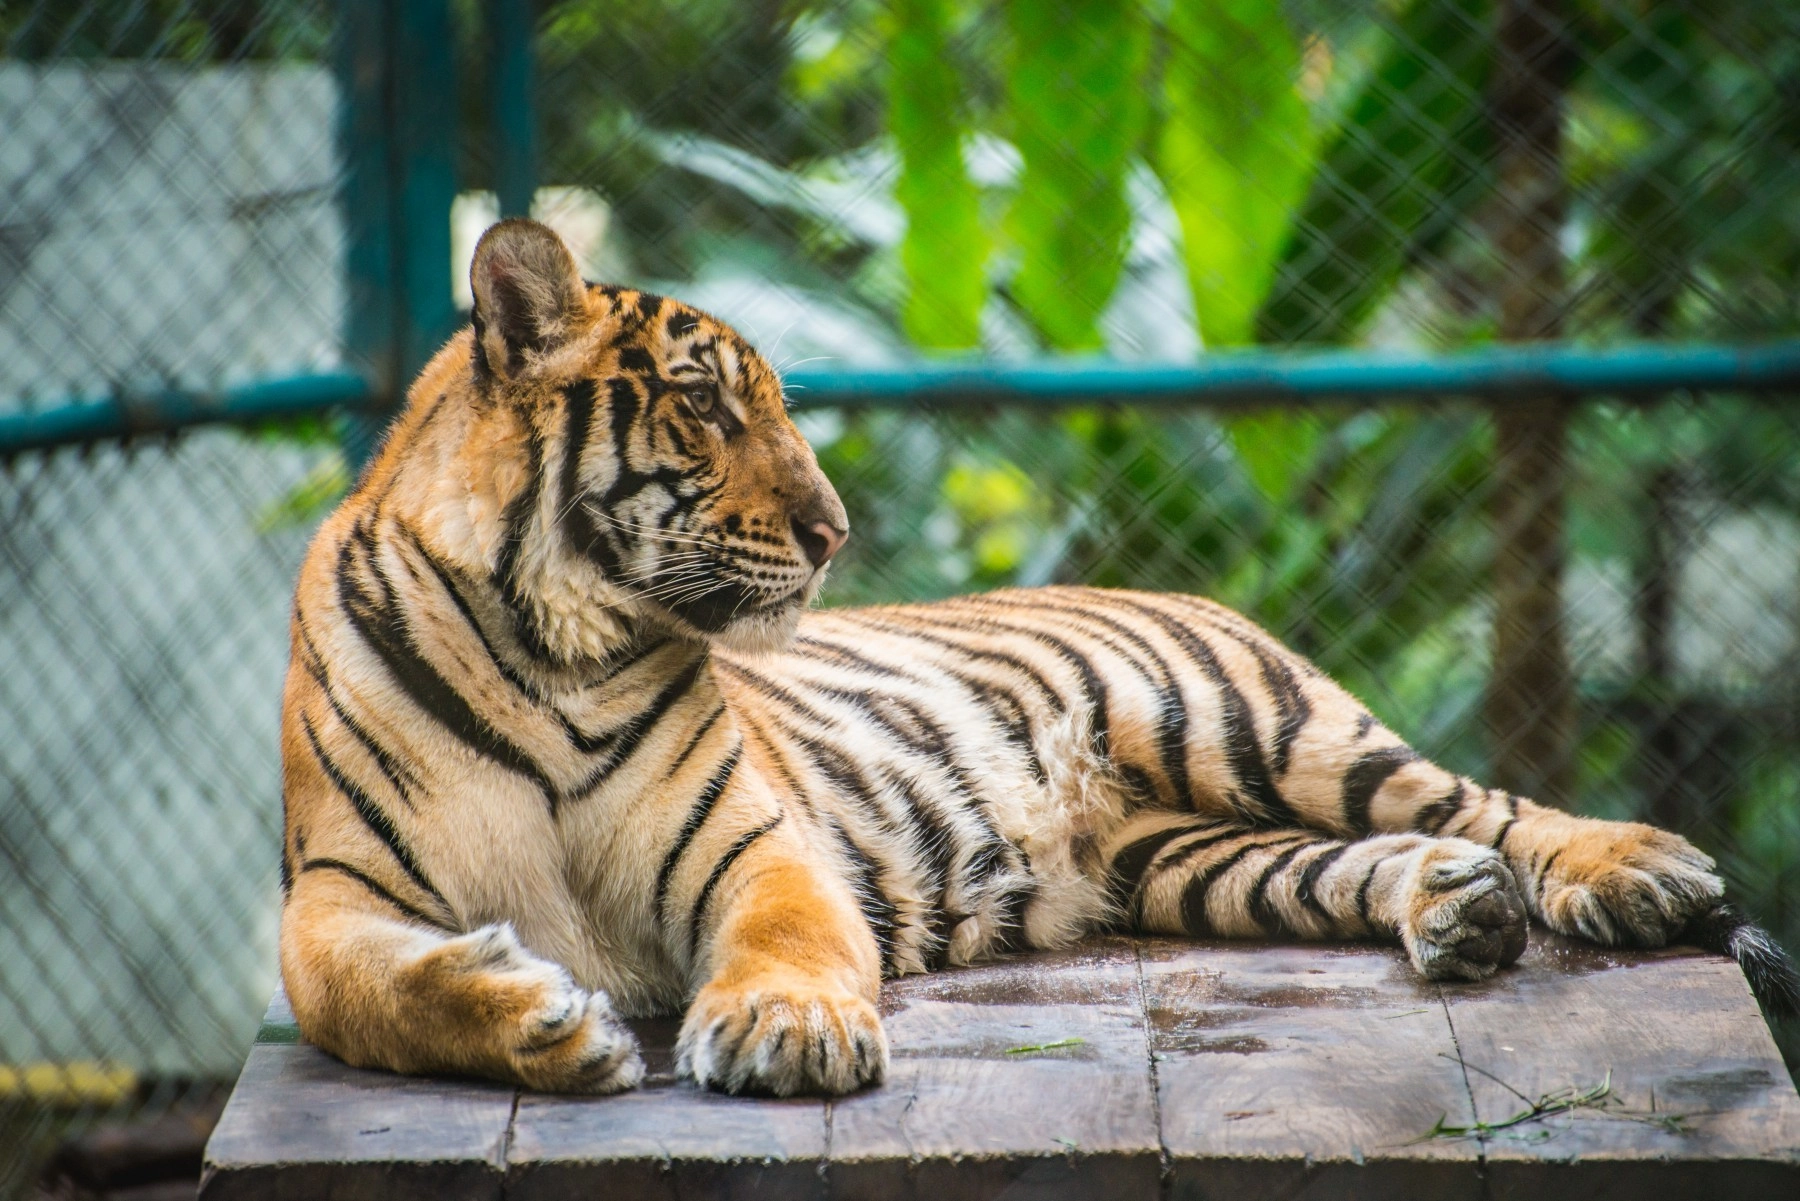 A captive tiger laying on a platform in a zoo.